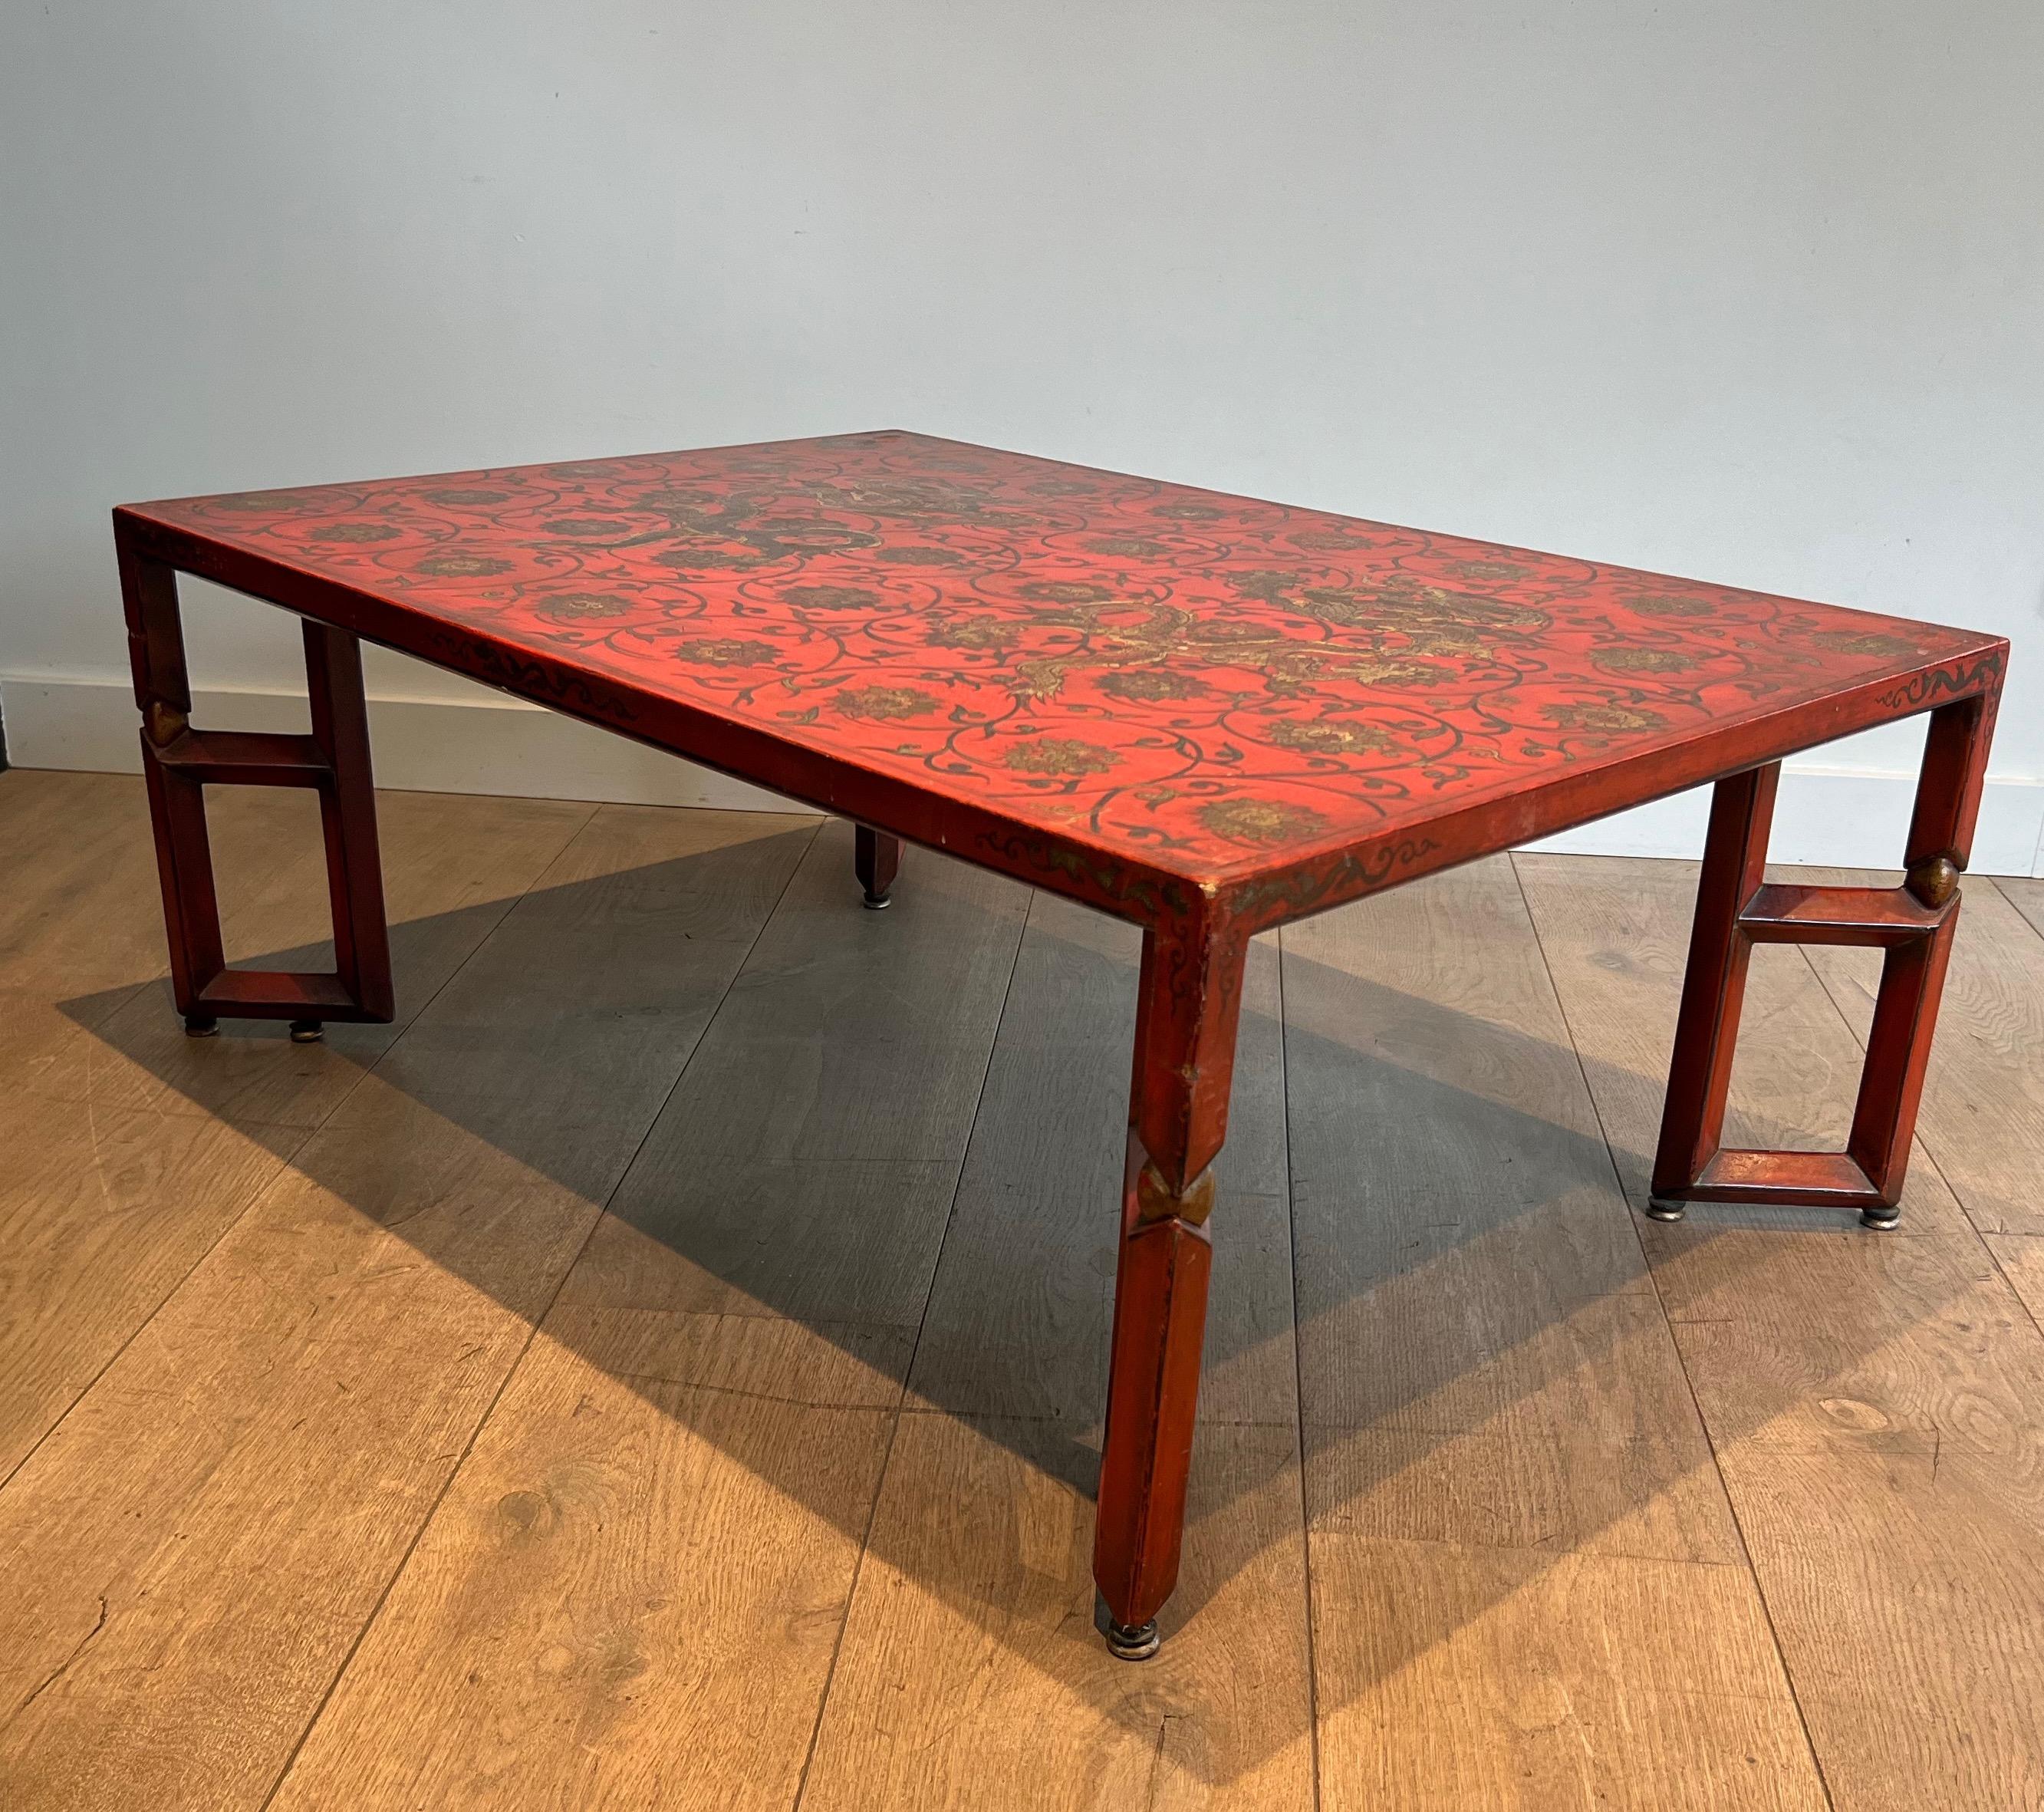 Large Red Lacquered Coffee Table with Gold Chinese Decorations For Sale 6